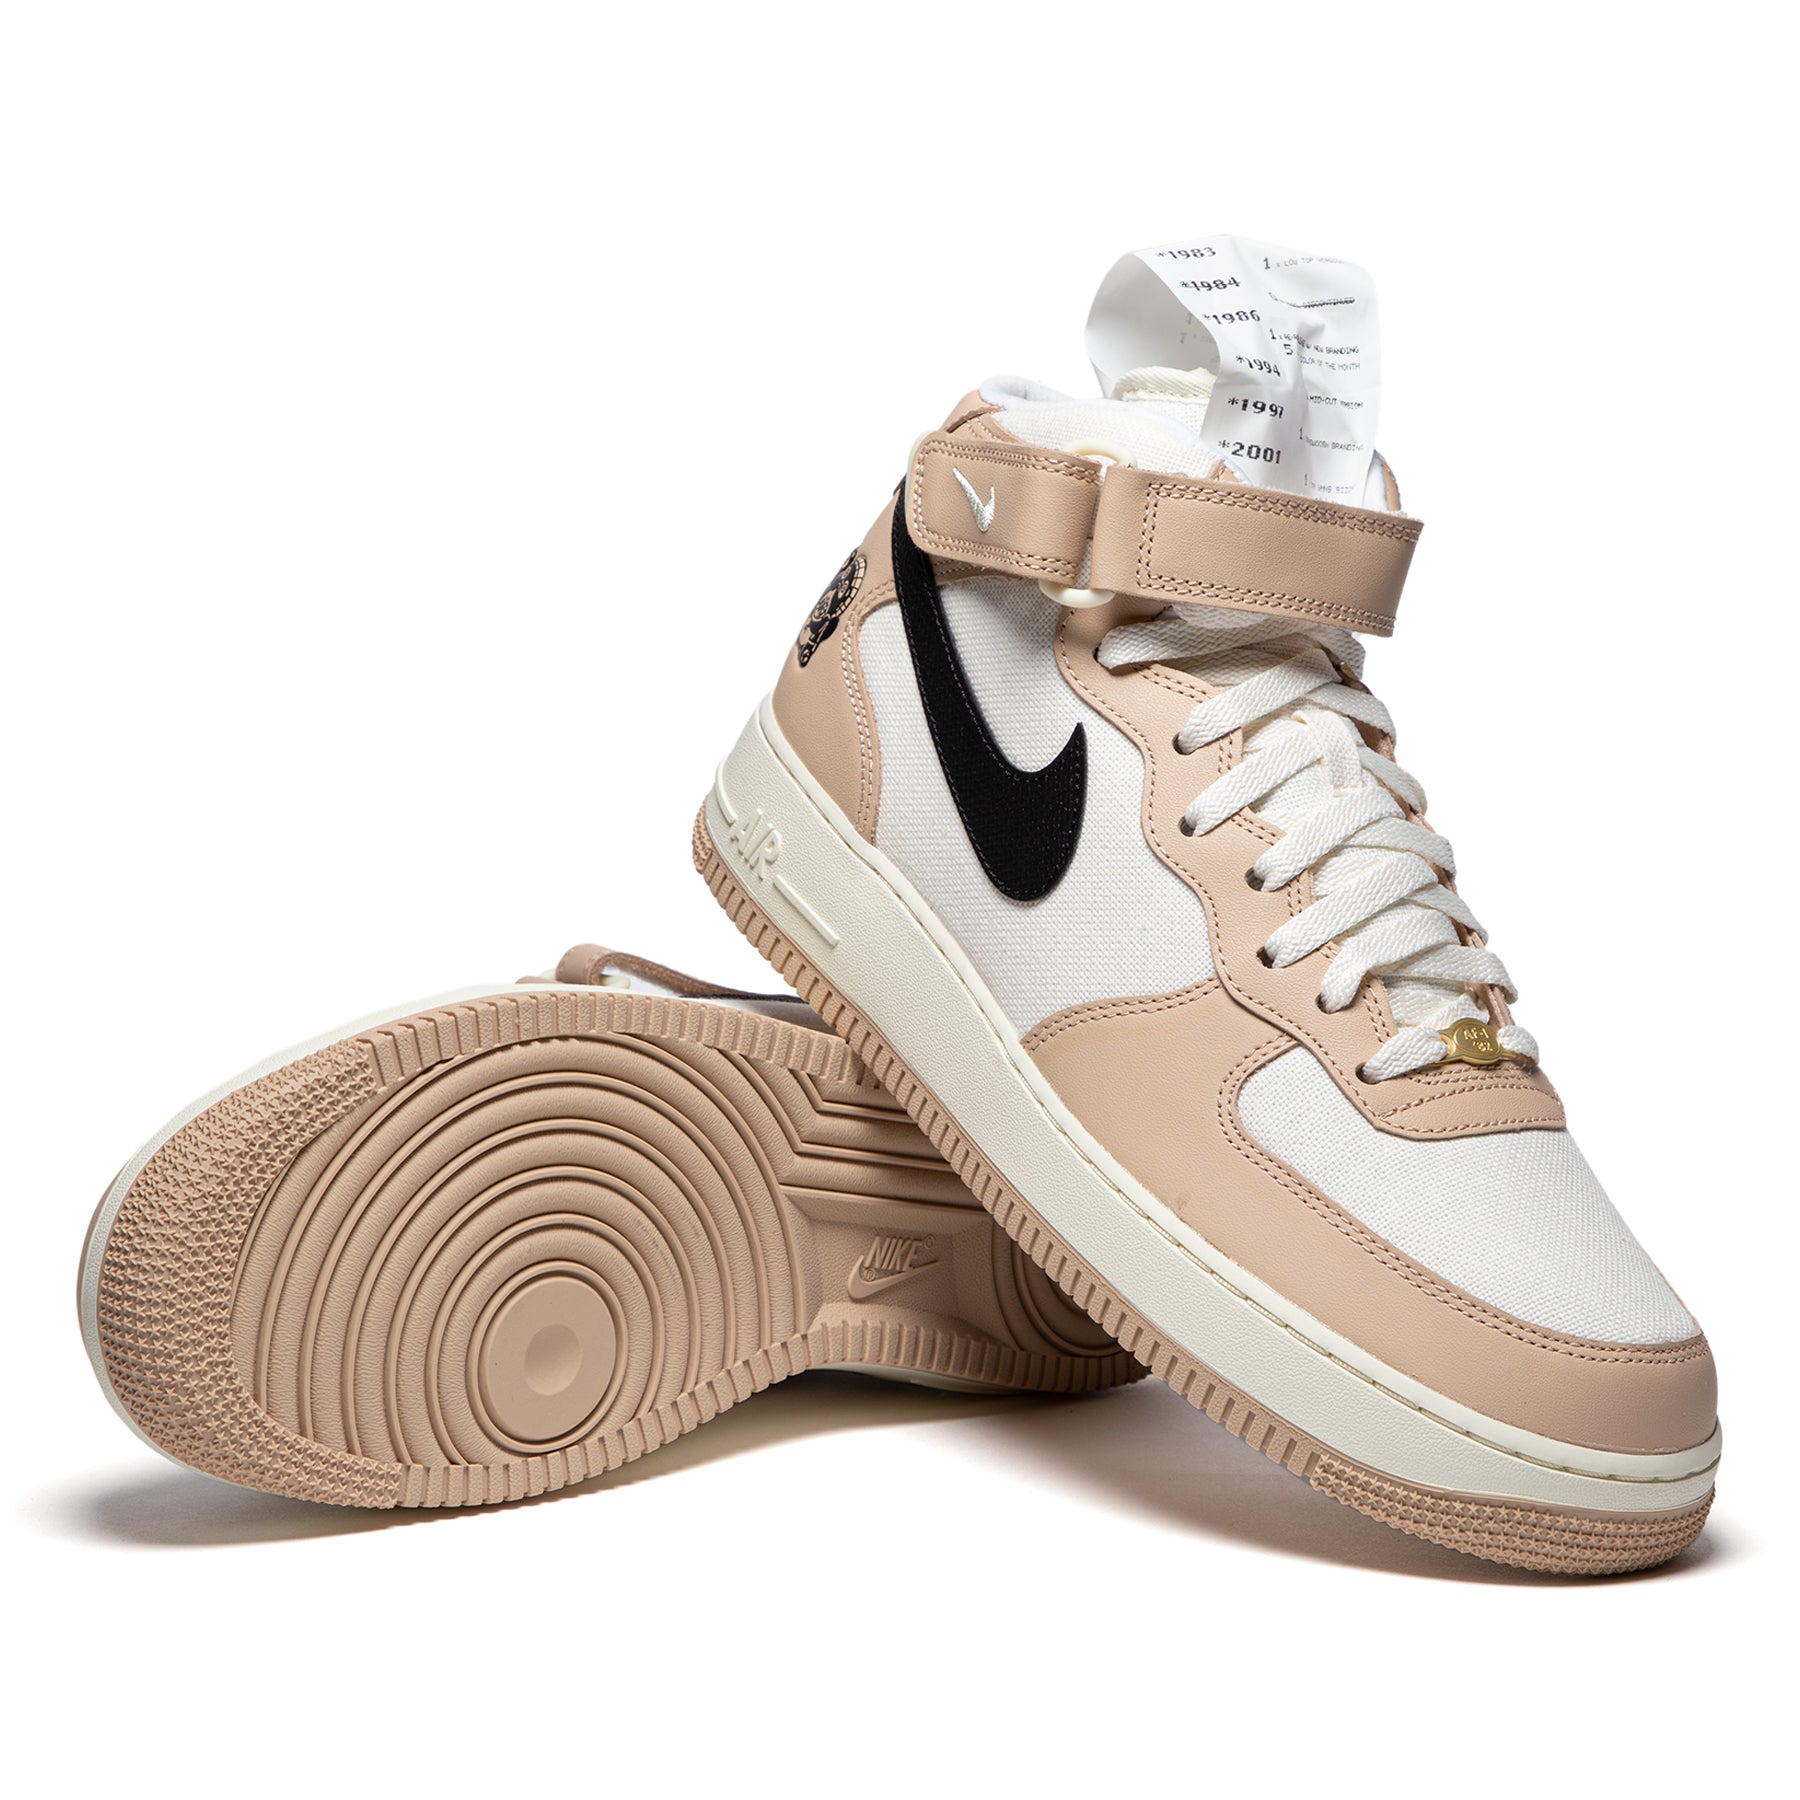 Nike Air Force 1 Mid '07 LX (Shimmer/Black/Ivory/Coco Milk)